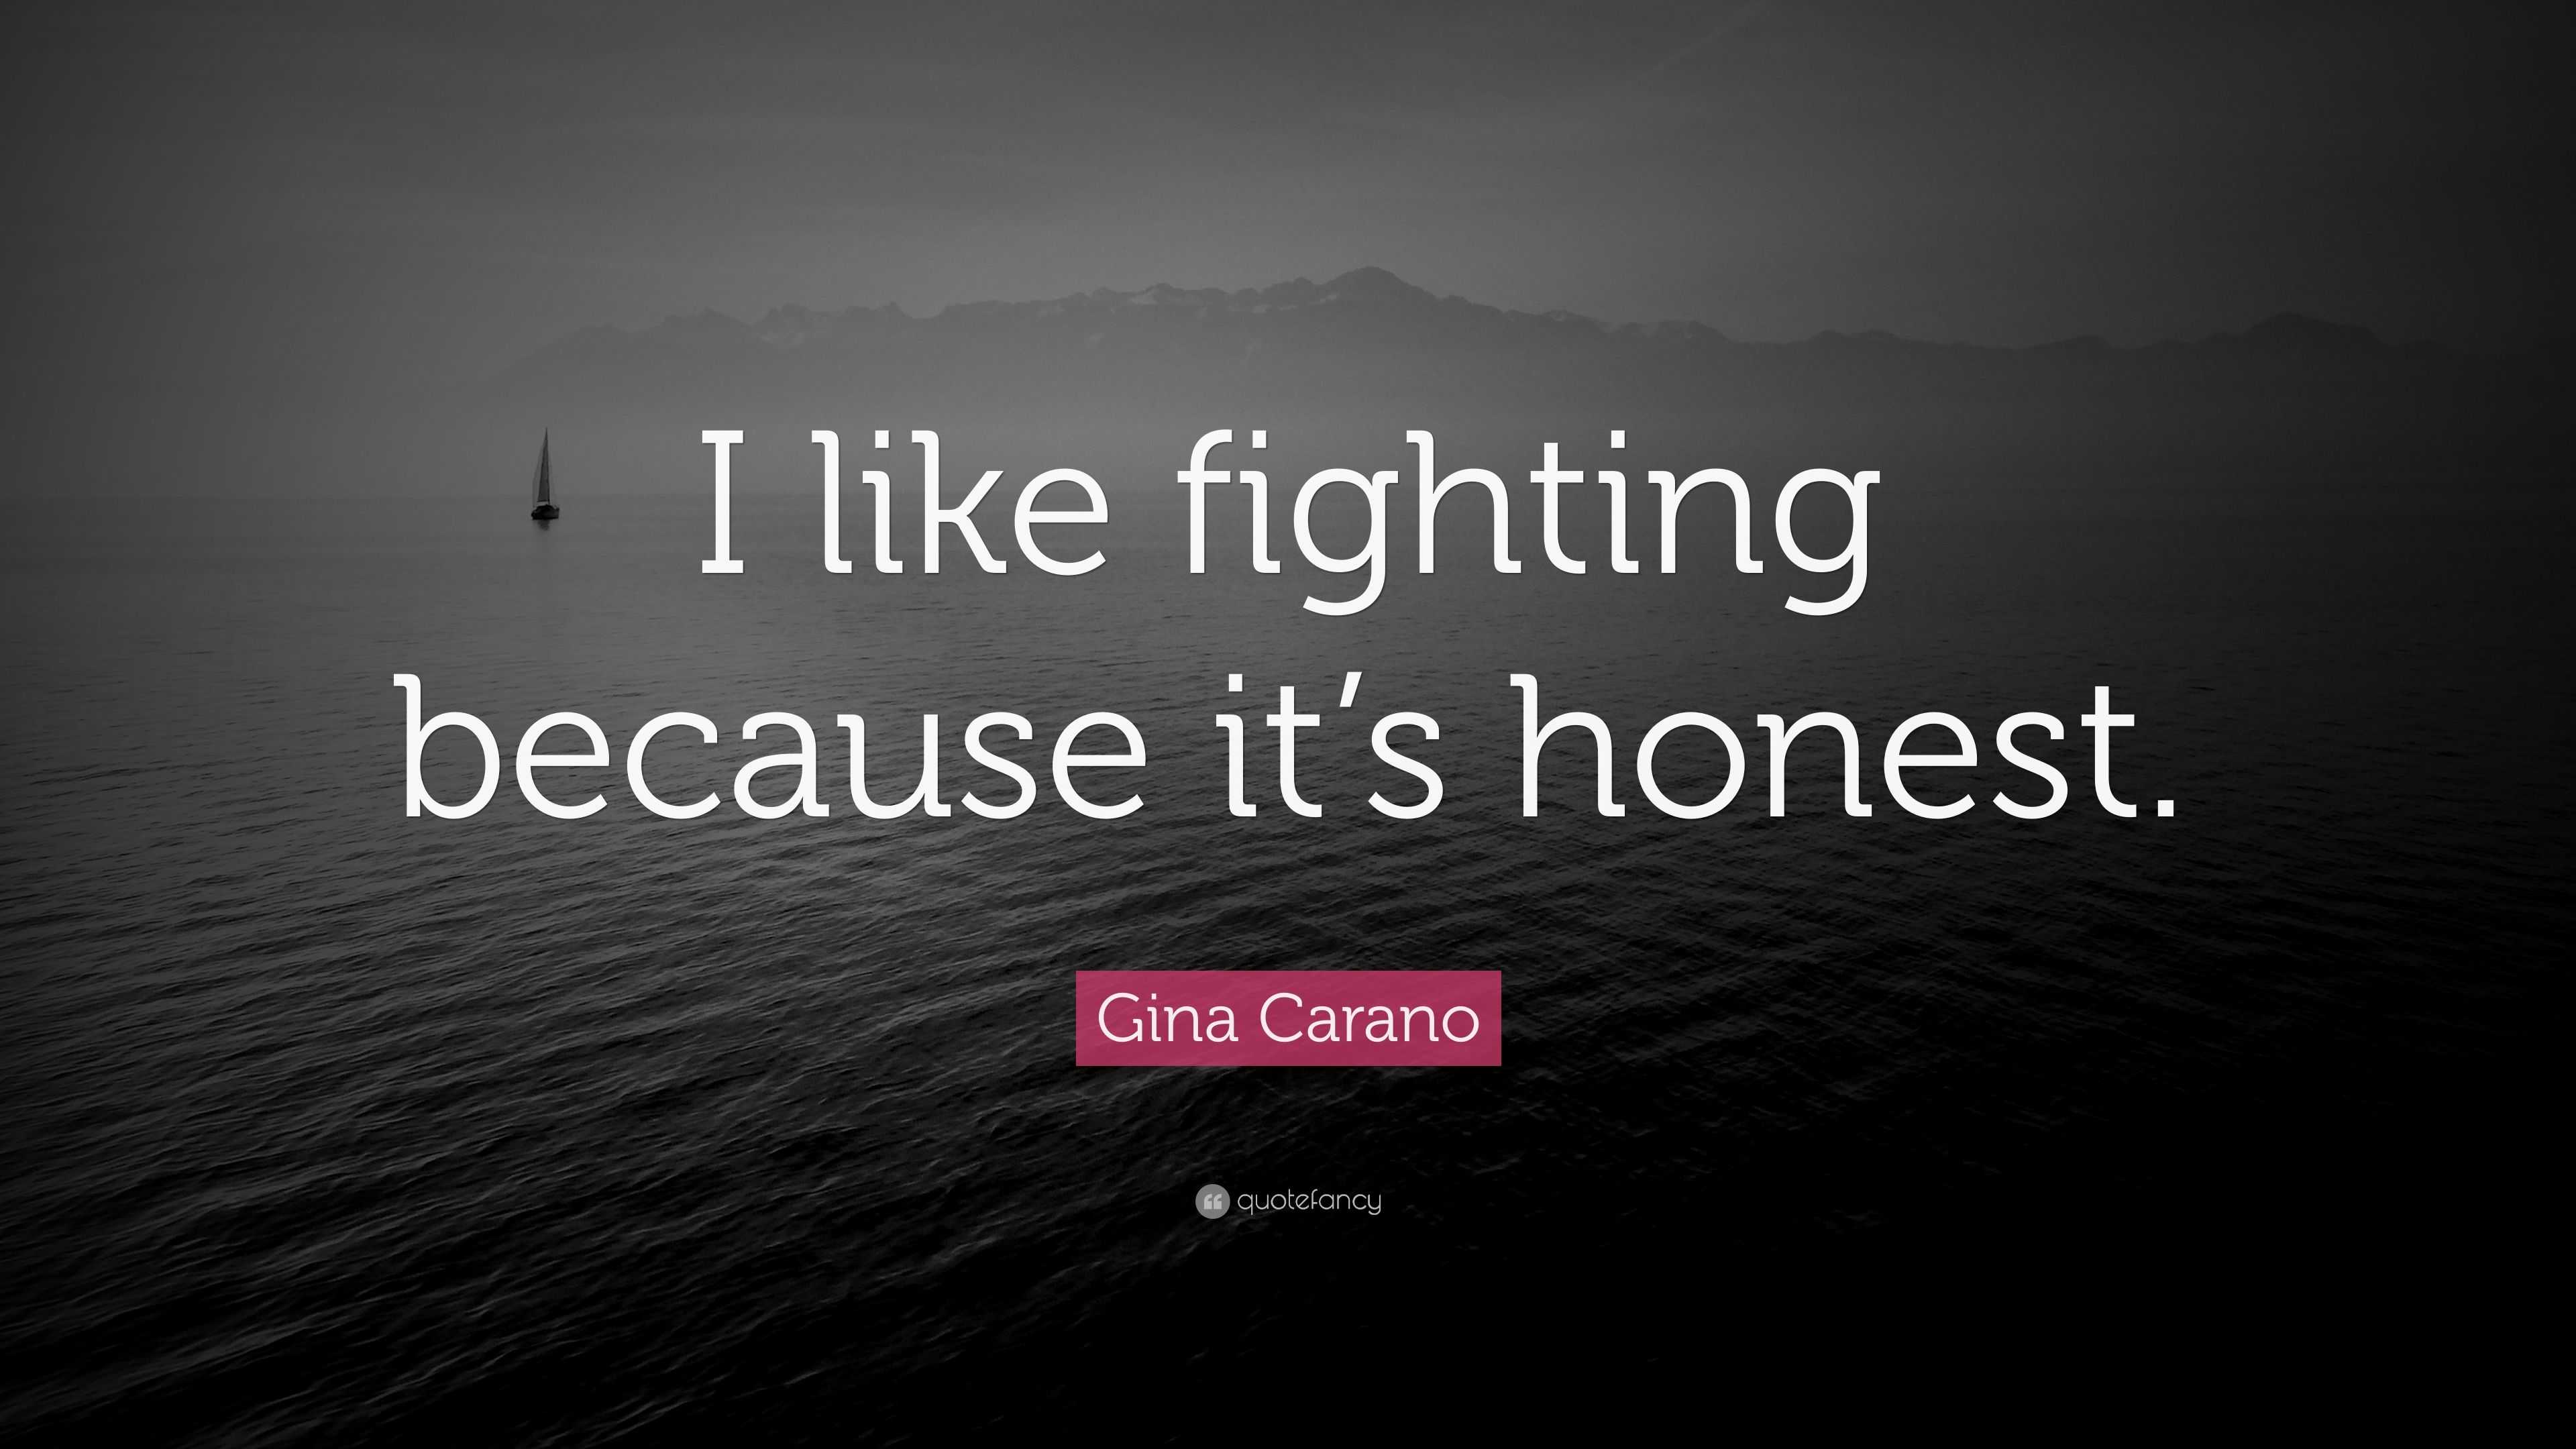 Gina Carano Quote: “I like fighting because it’s honest.”